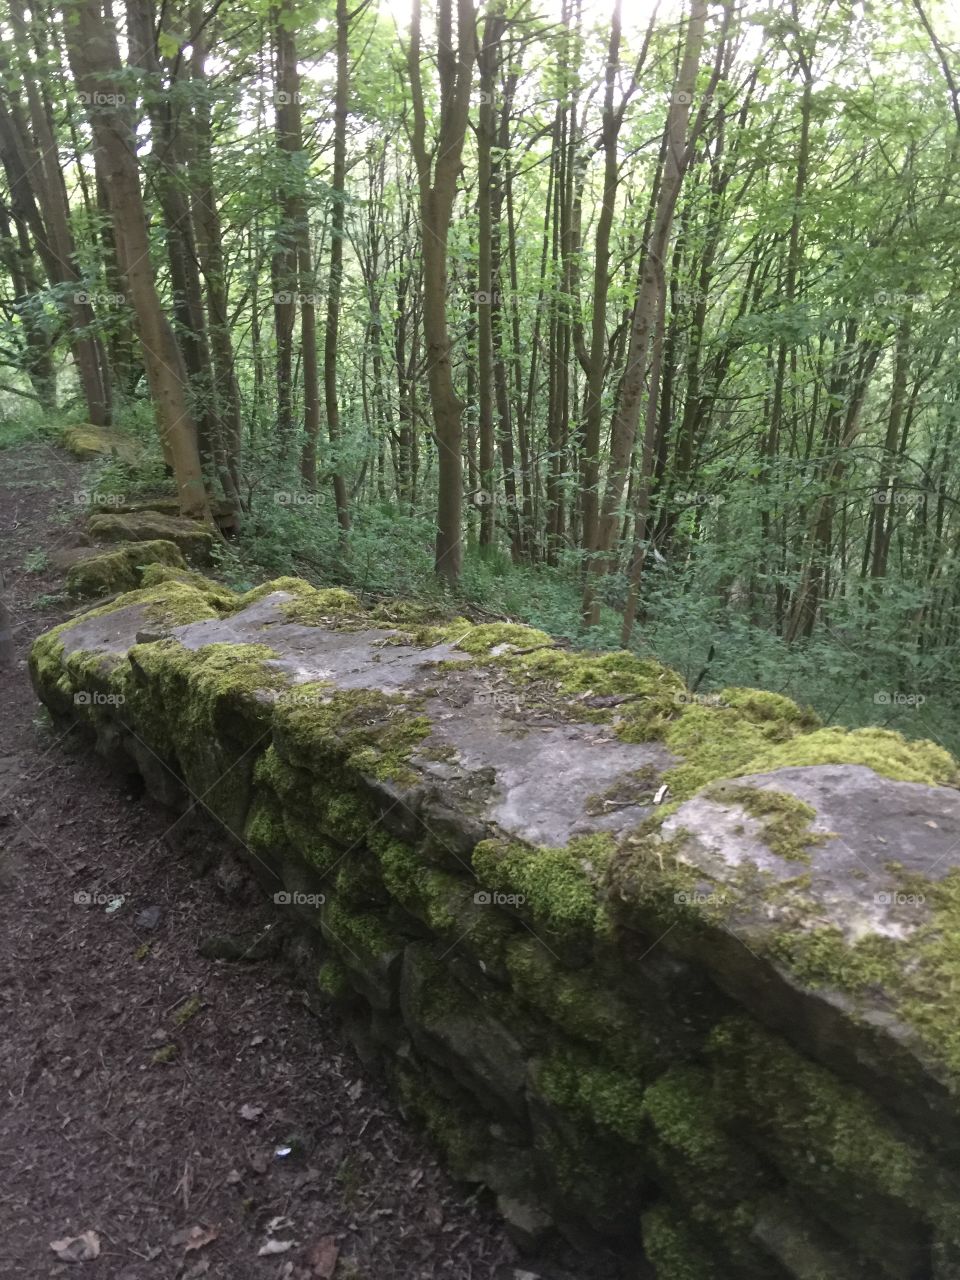 Mossy wall in the woods. Summer in England